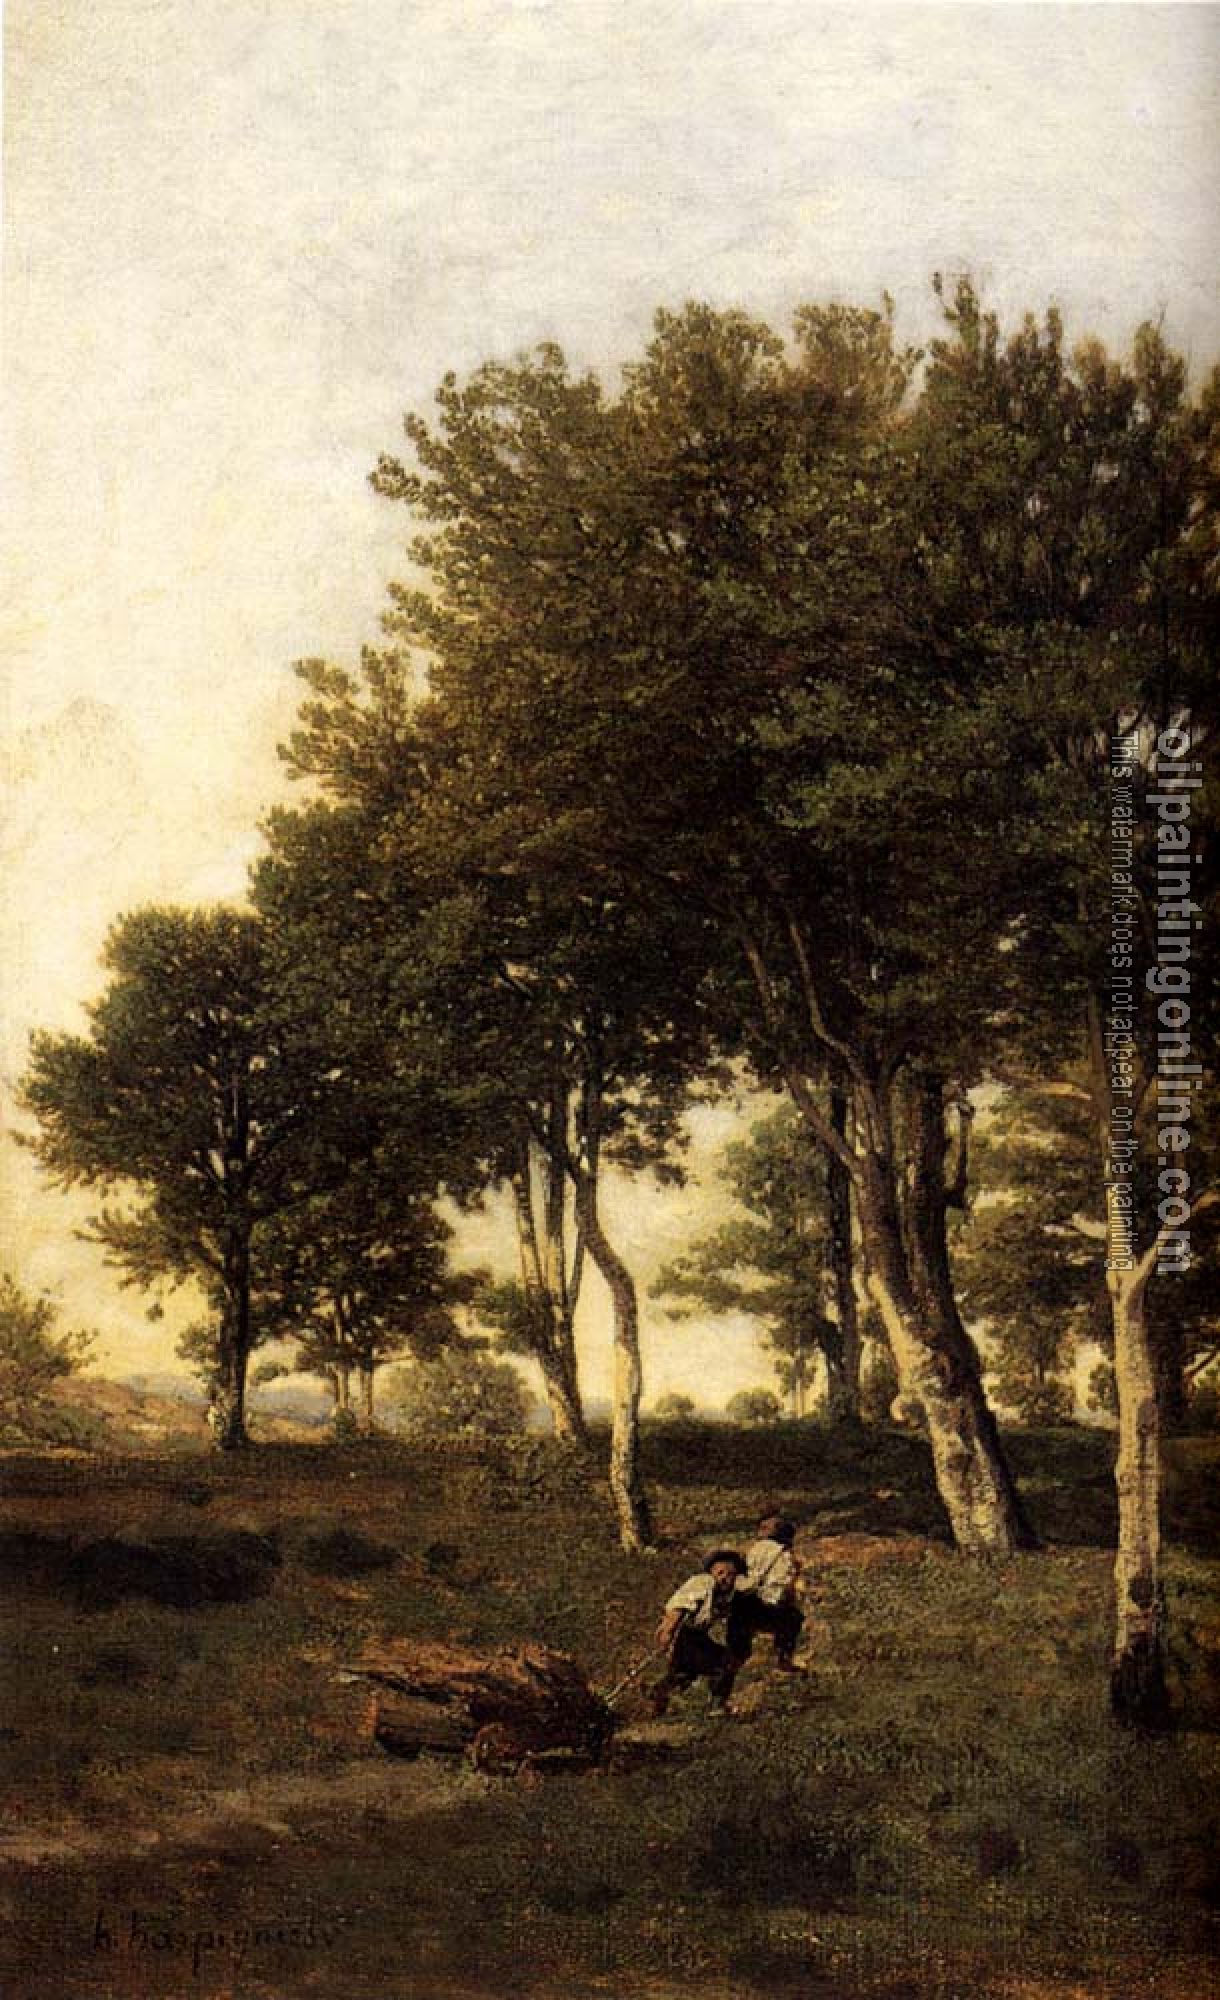 Henri-Joseph Harpignies - Landscape With Two Boys Carrying Firewood